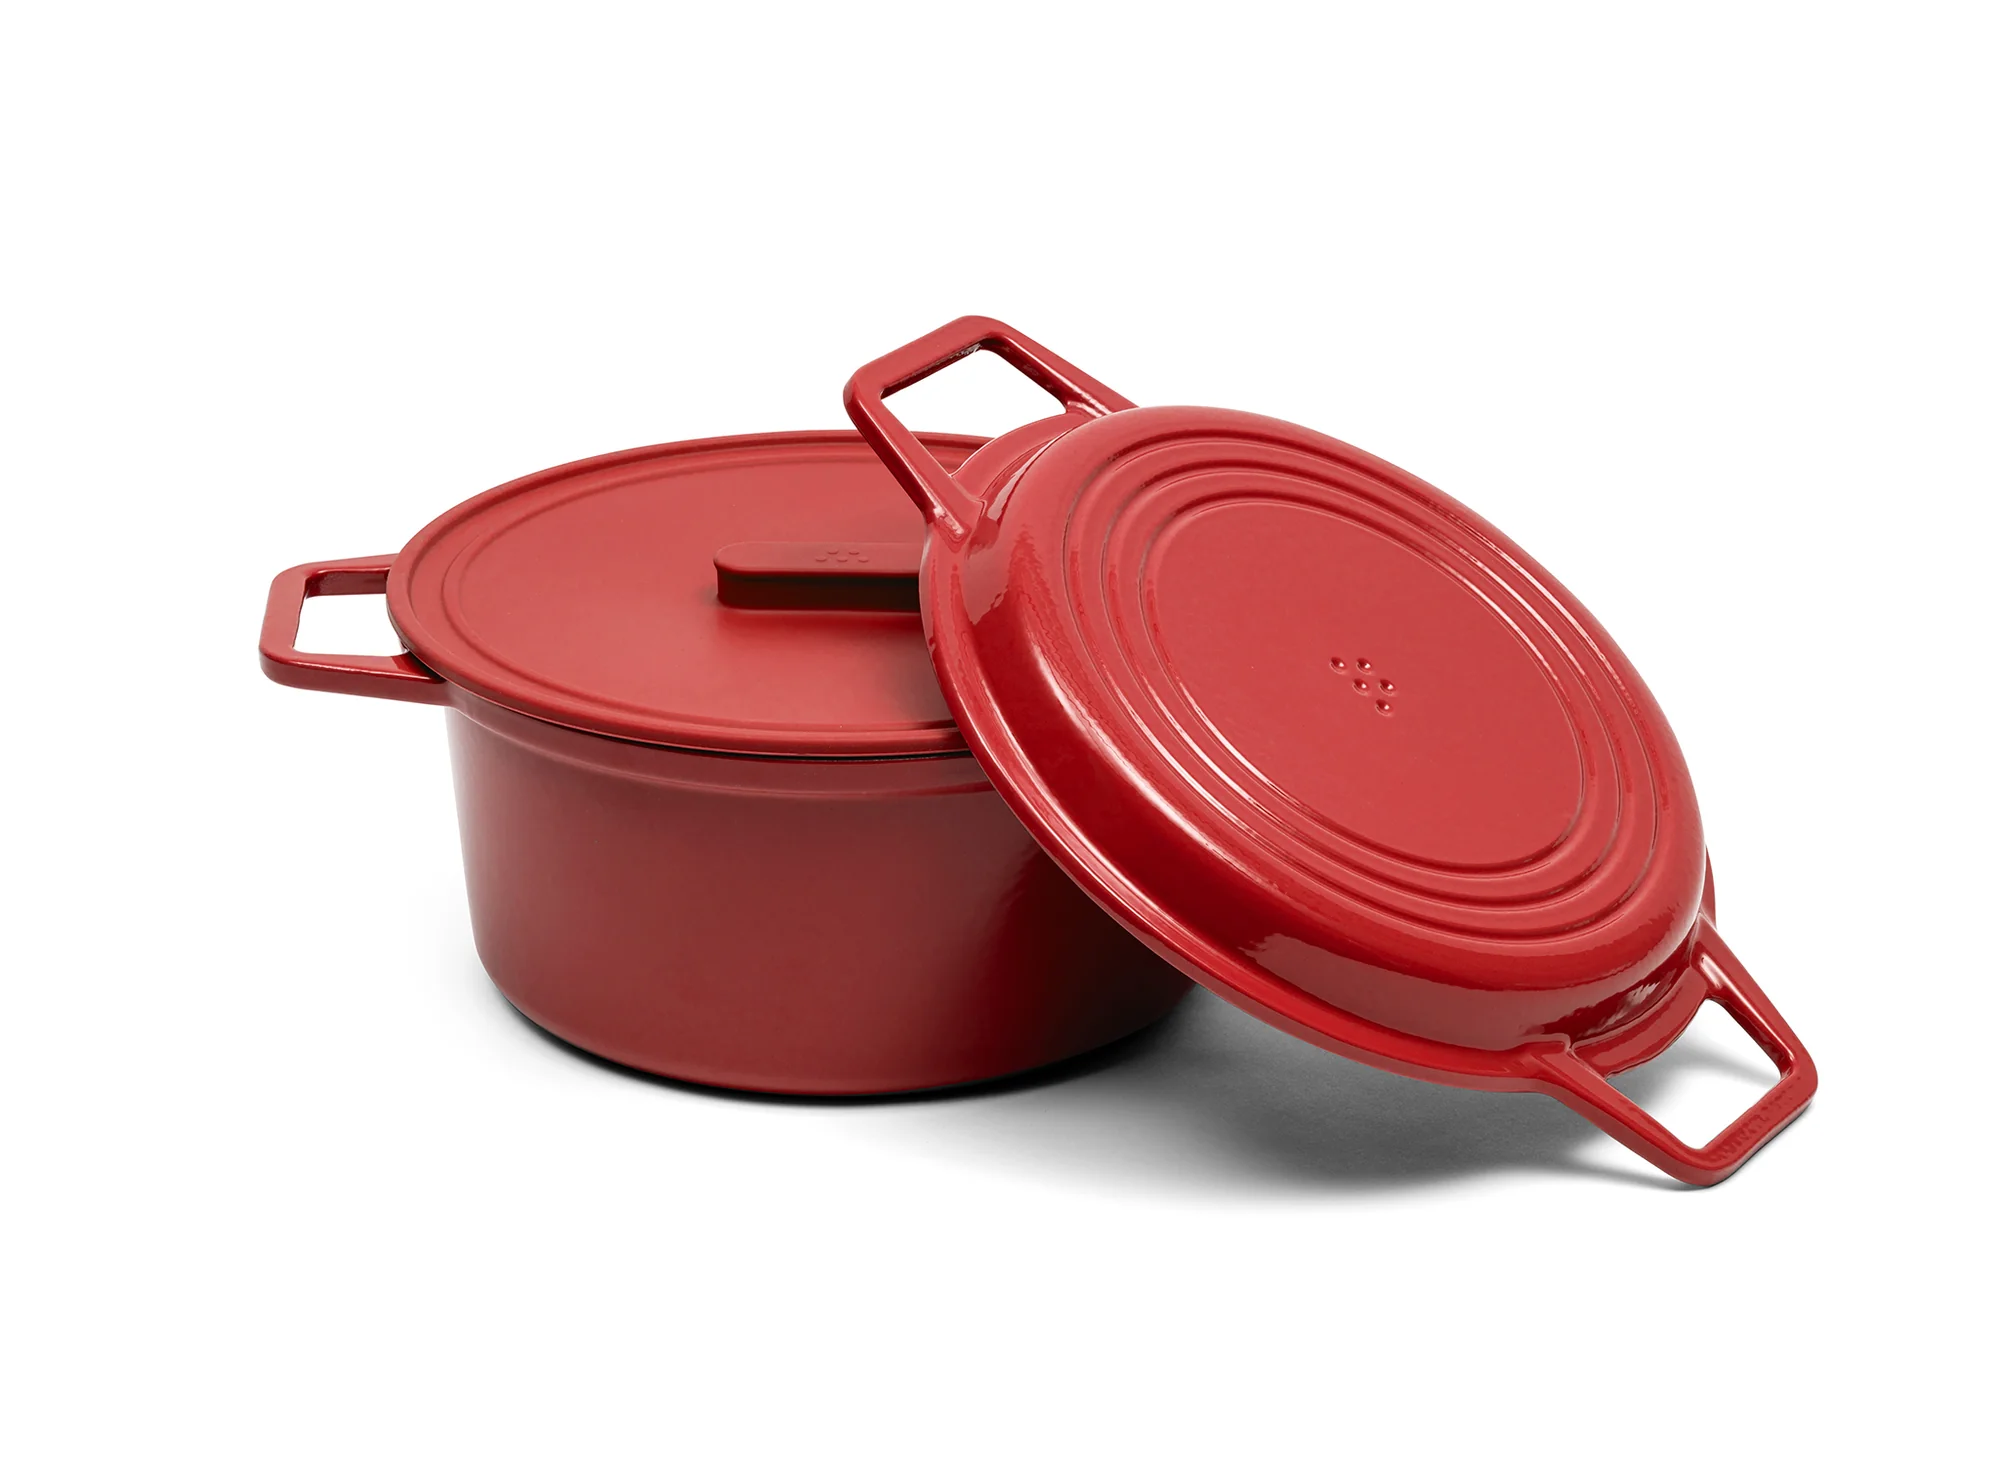 Misen red dutch oven with grill lid (7 quart).